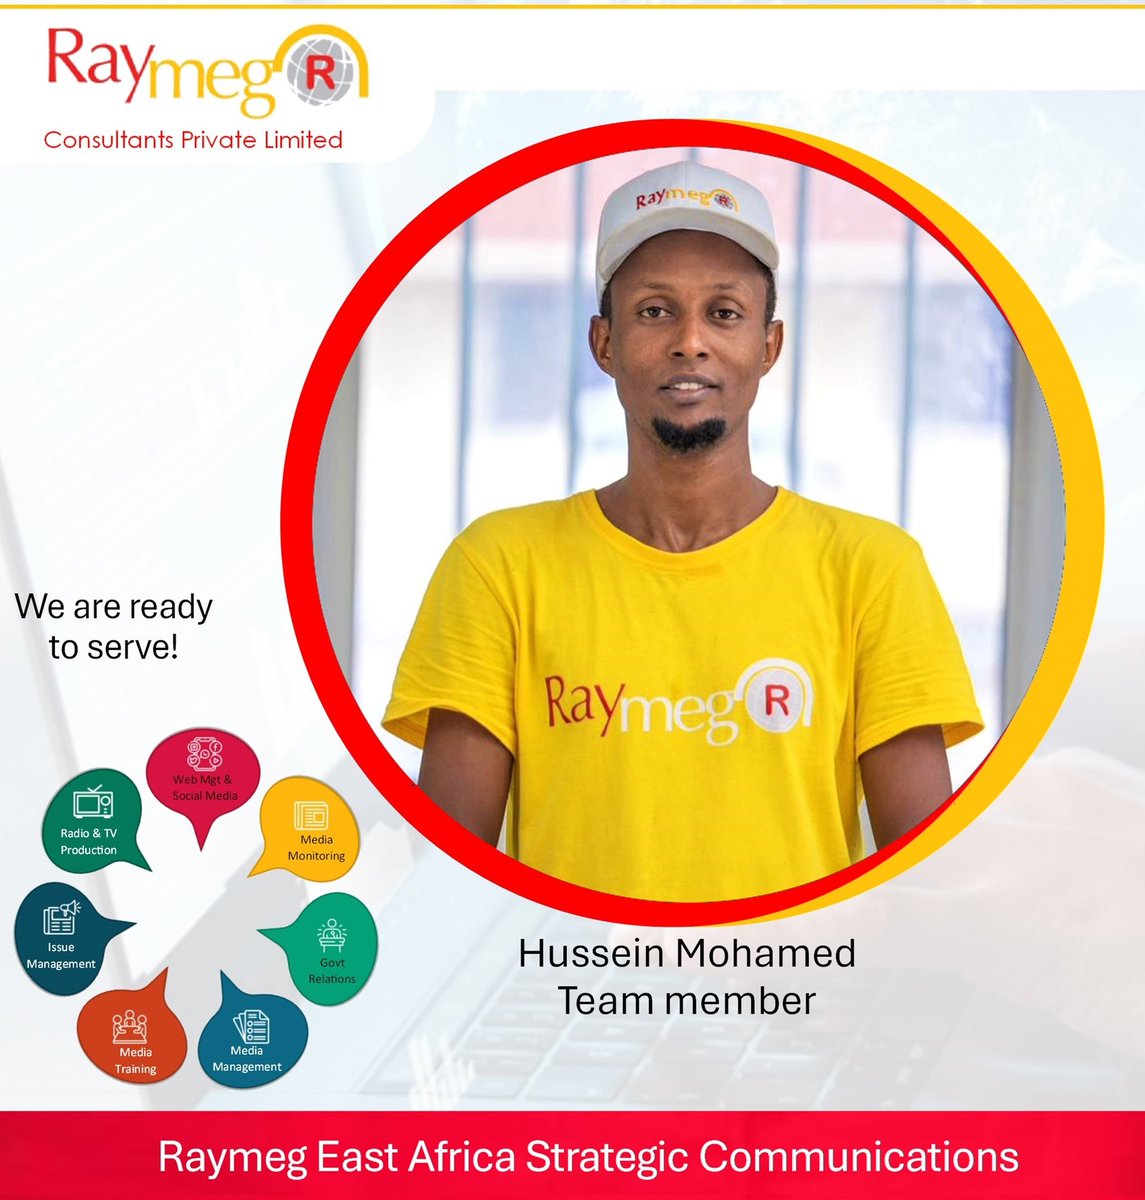 Raymeg is home to the sharpest & most creative strategic communication minds in Africa. We are ready to serve your strategic communication needs!